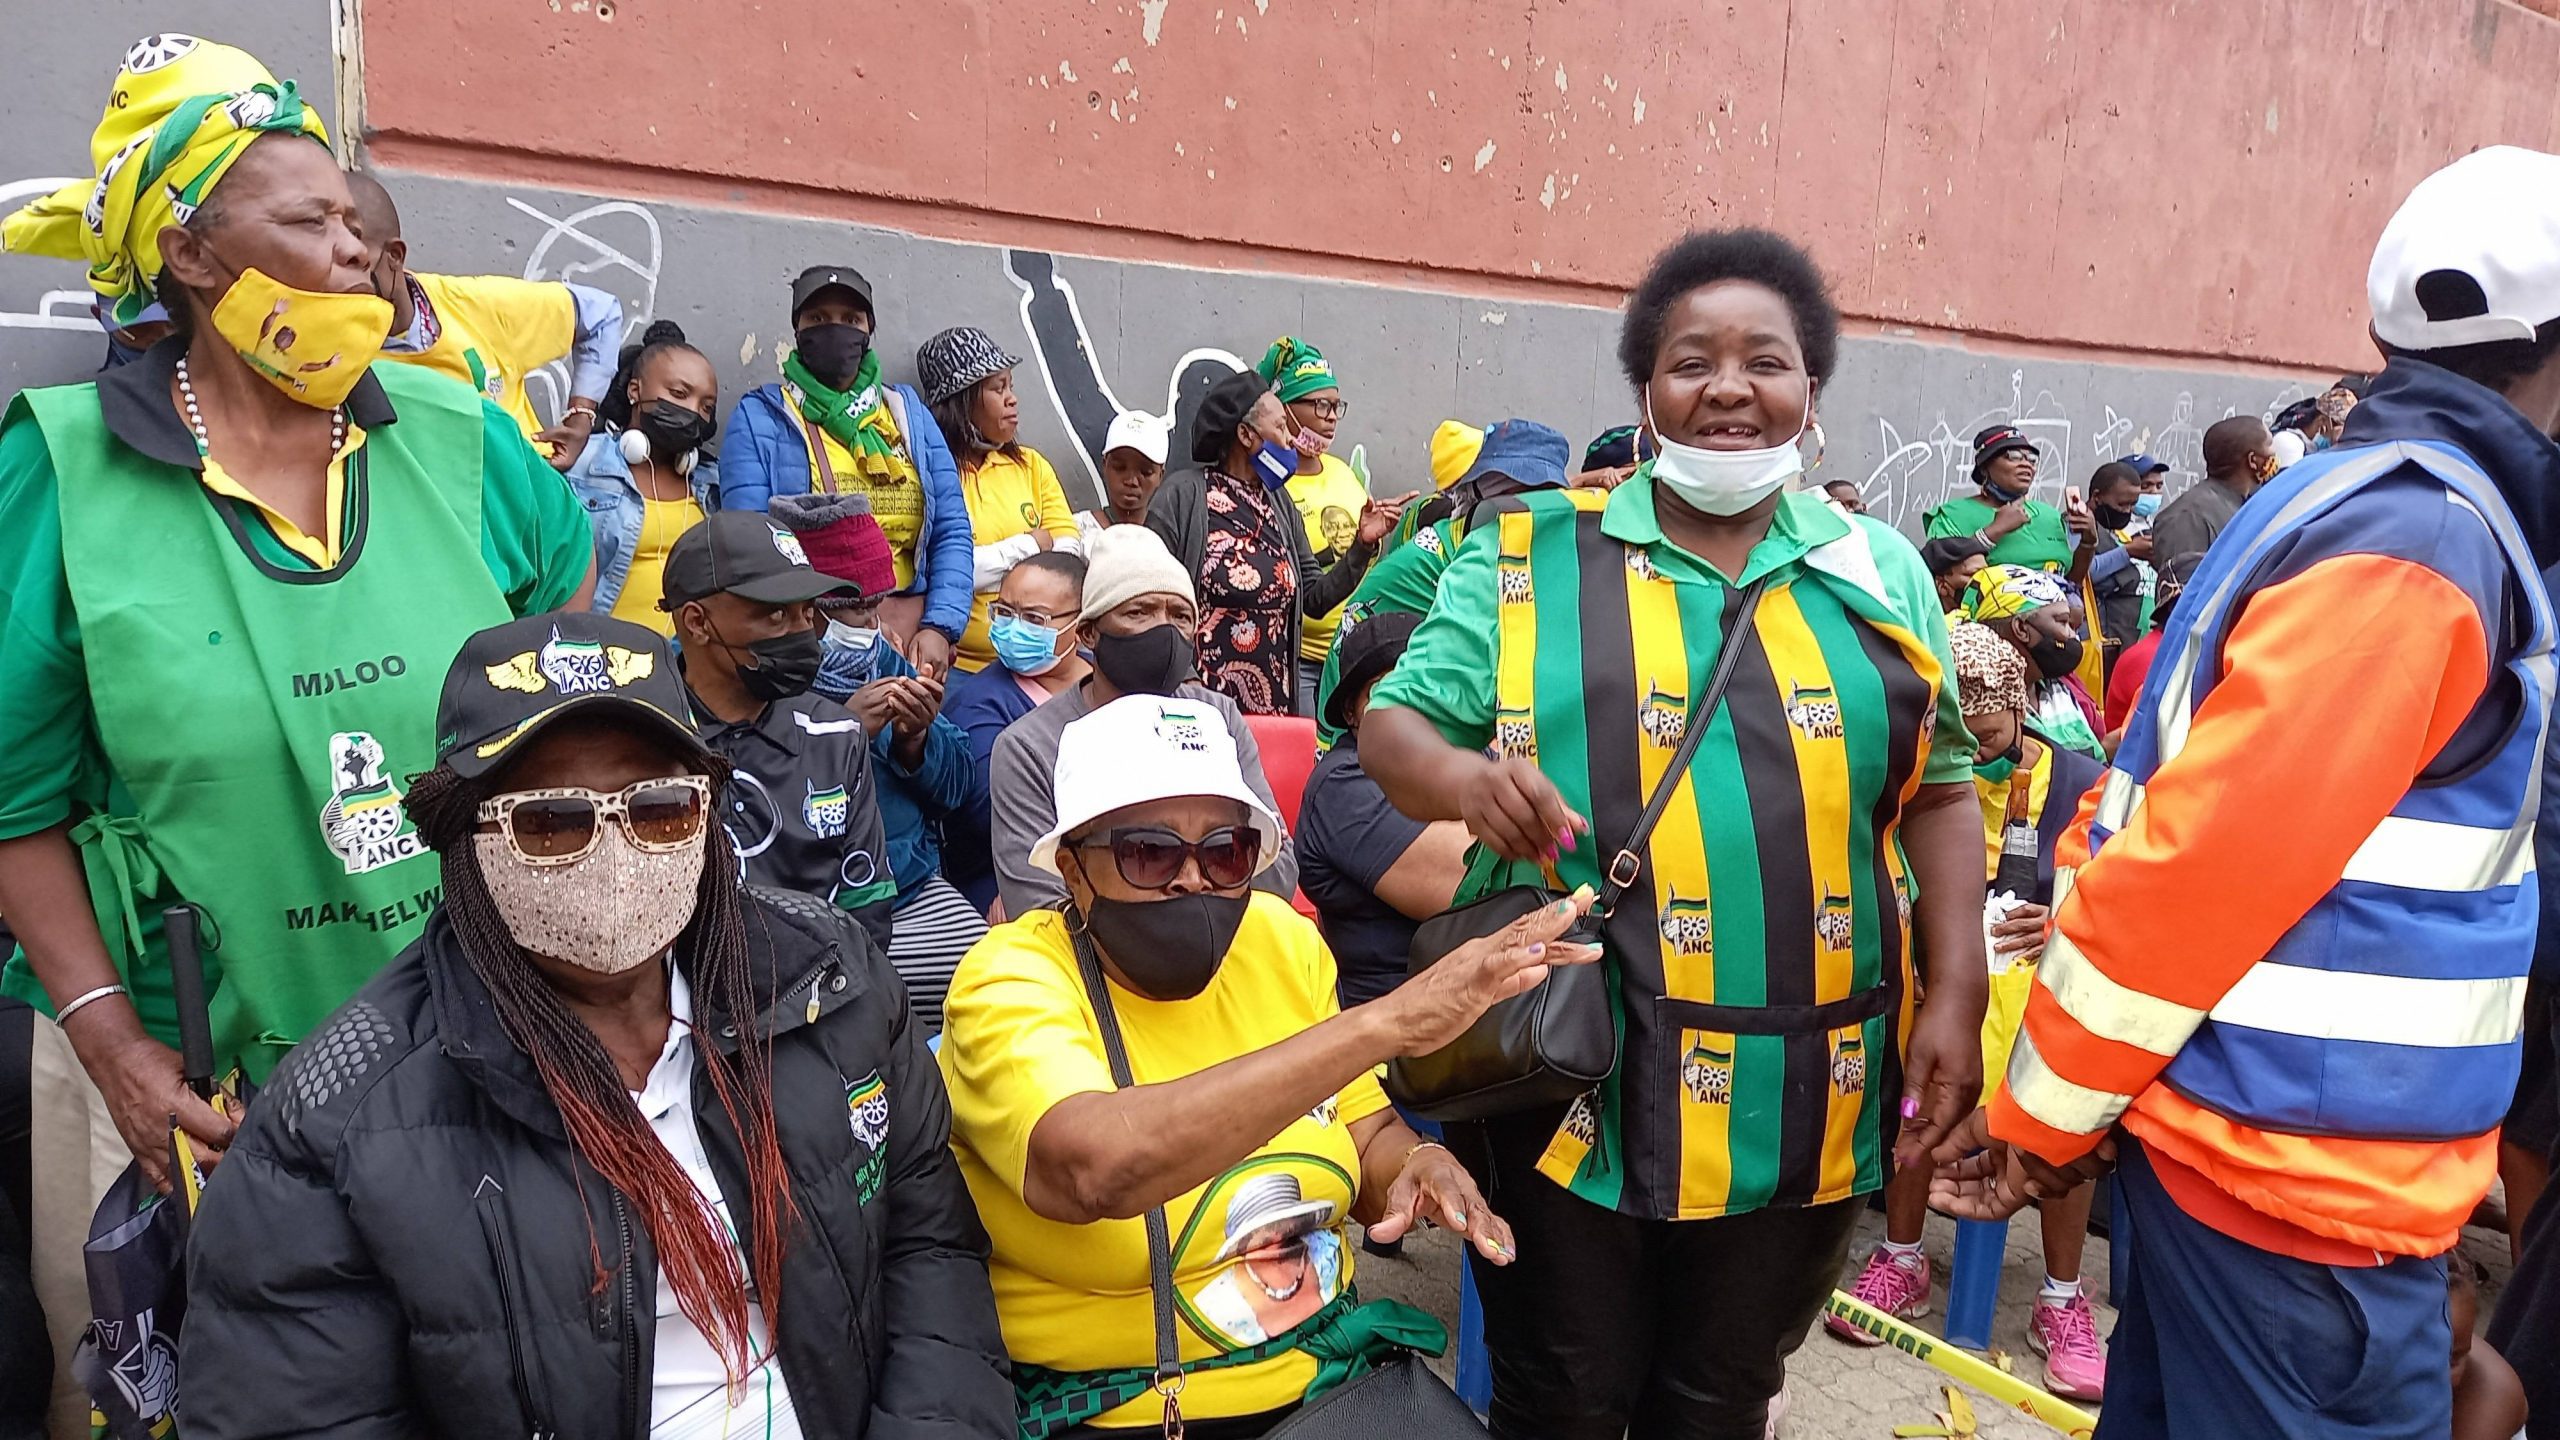 ANC ward 108 candidate, Deborah Francisco, will not resign in spite of those who hate her